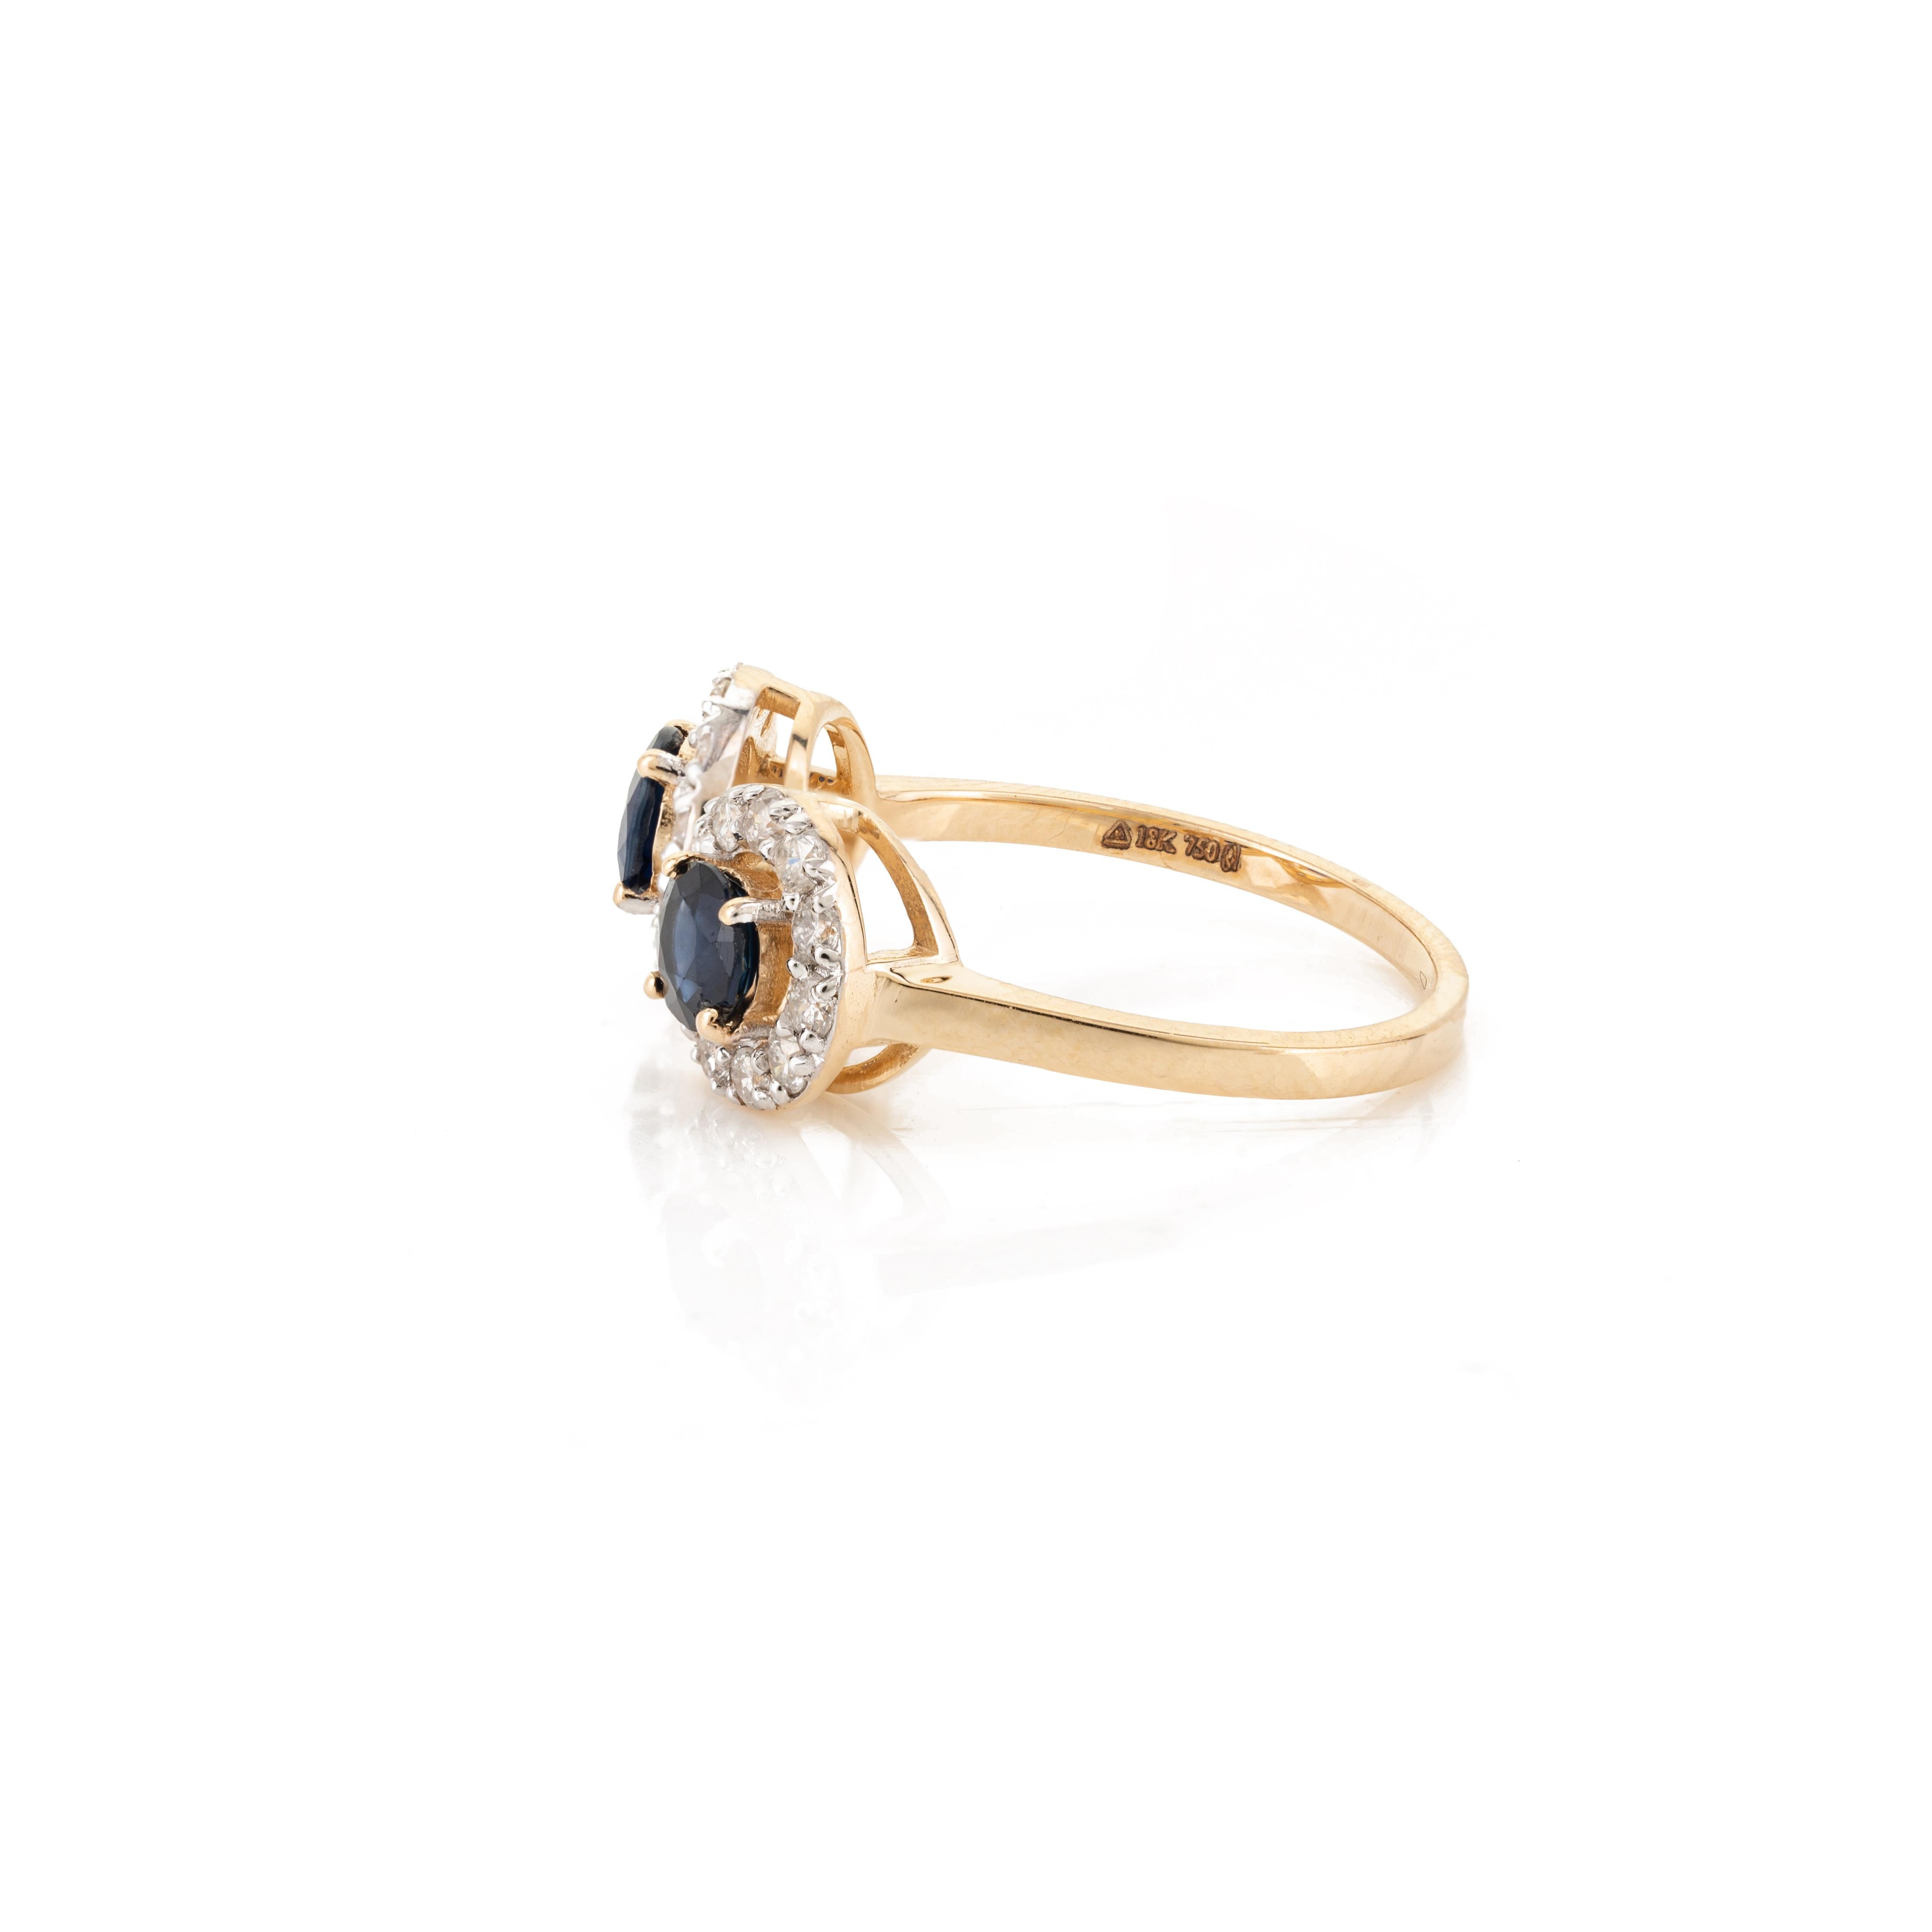 Im Angebot: Classic Two Blue Sapphire Diamond Halo Ring 18k Solid Gelbgold () 5